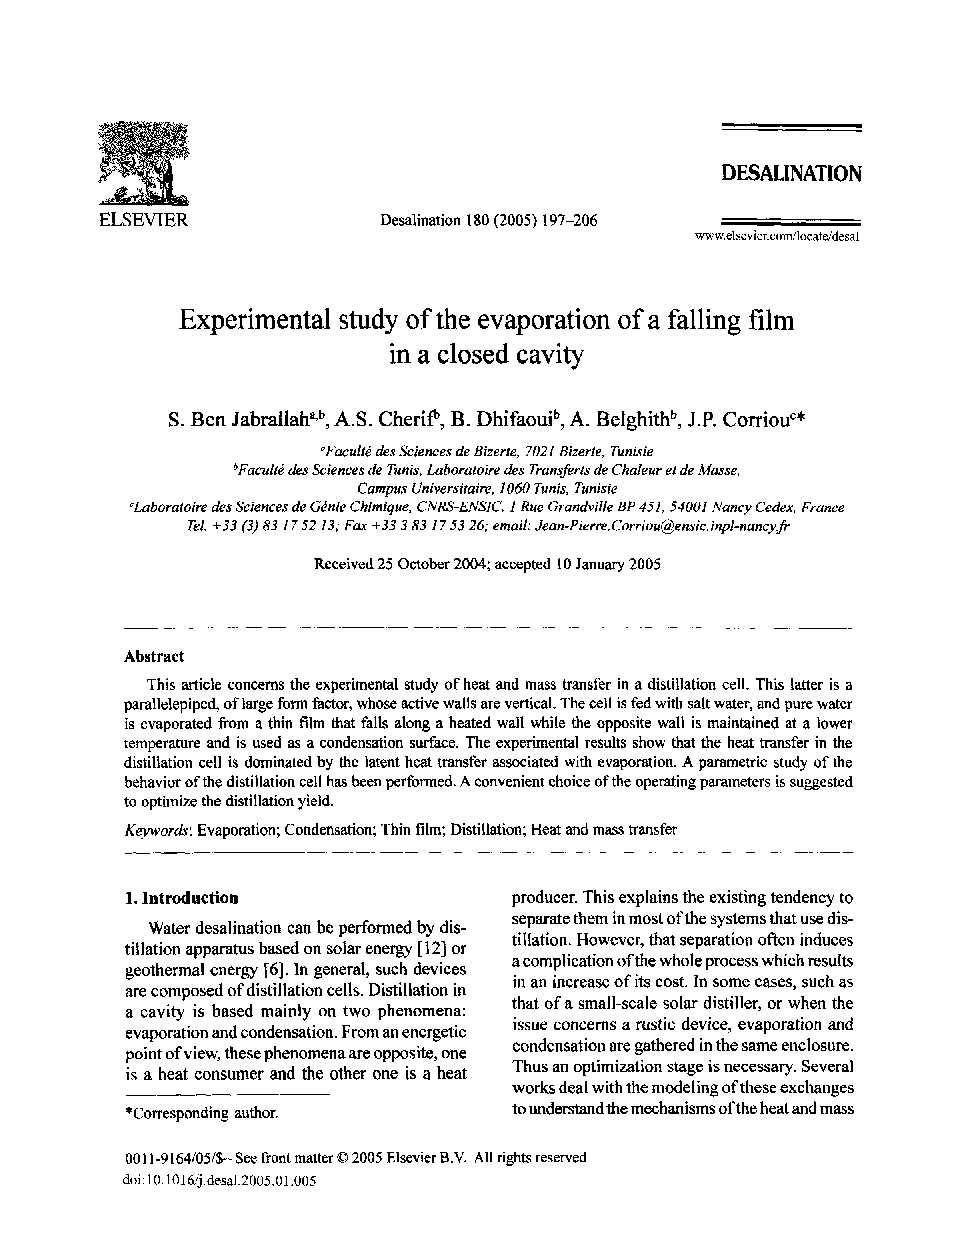 Experimental study of the evaporation of a falling film in a closed cavity